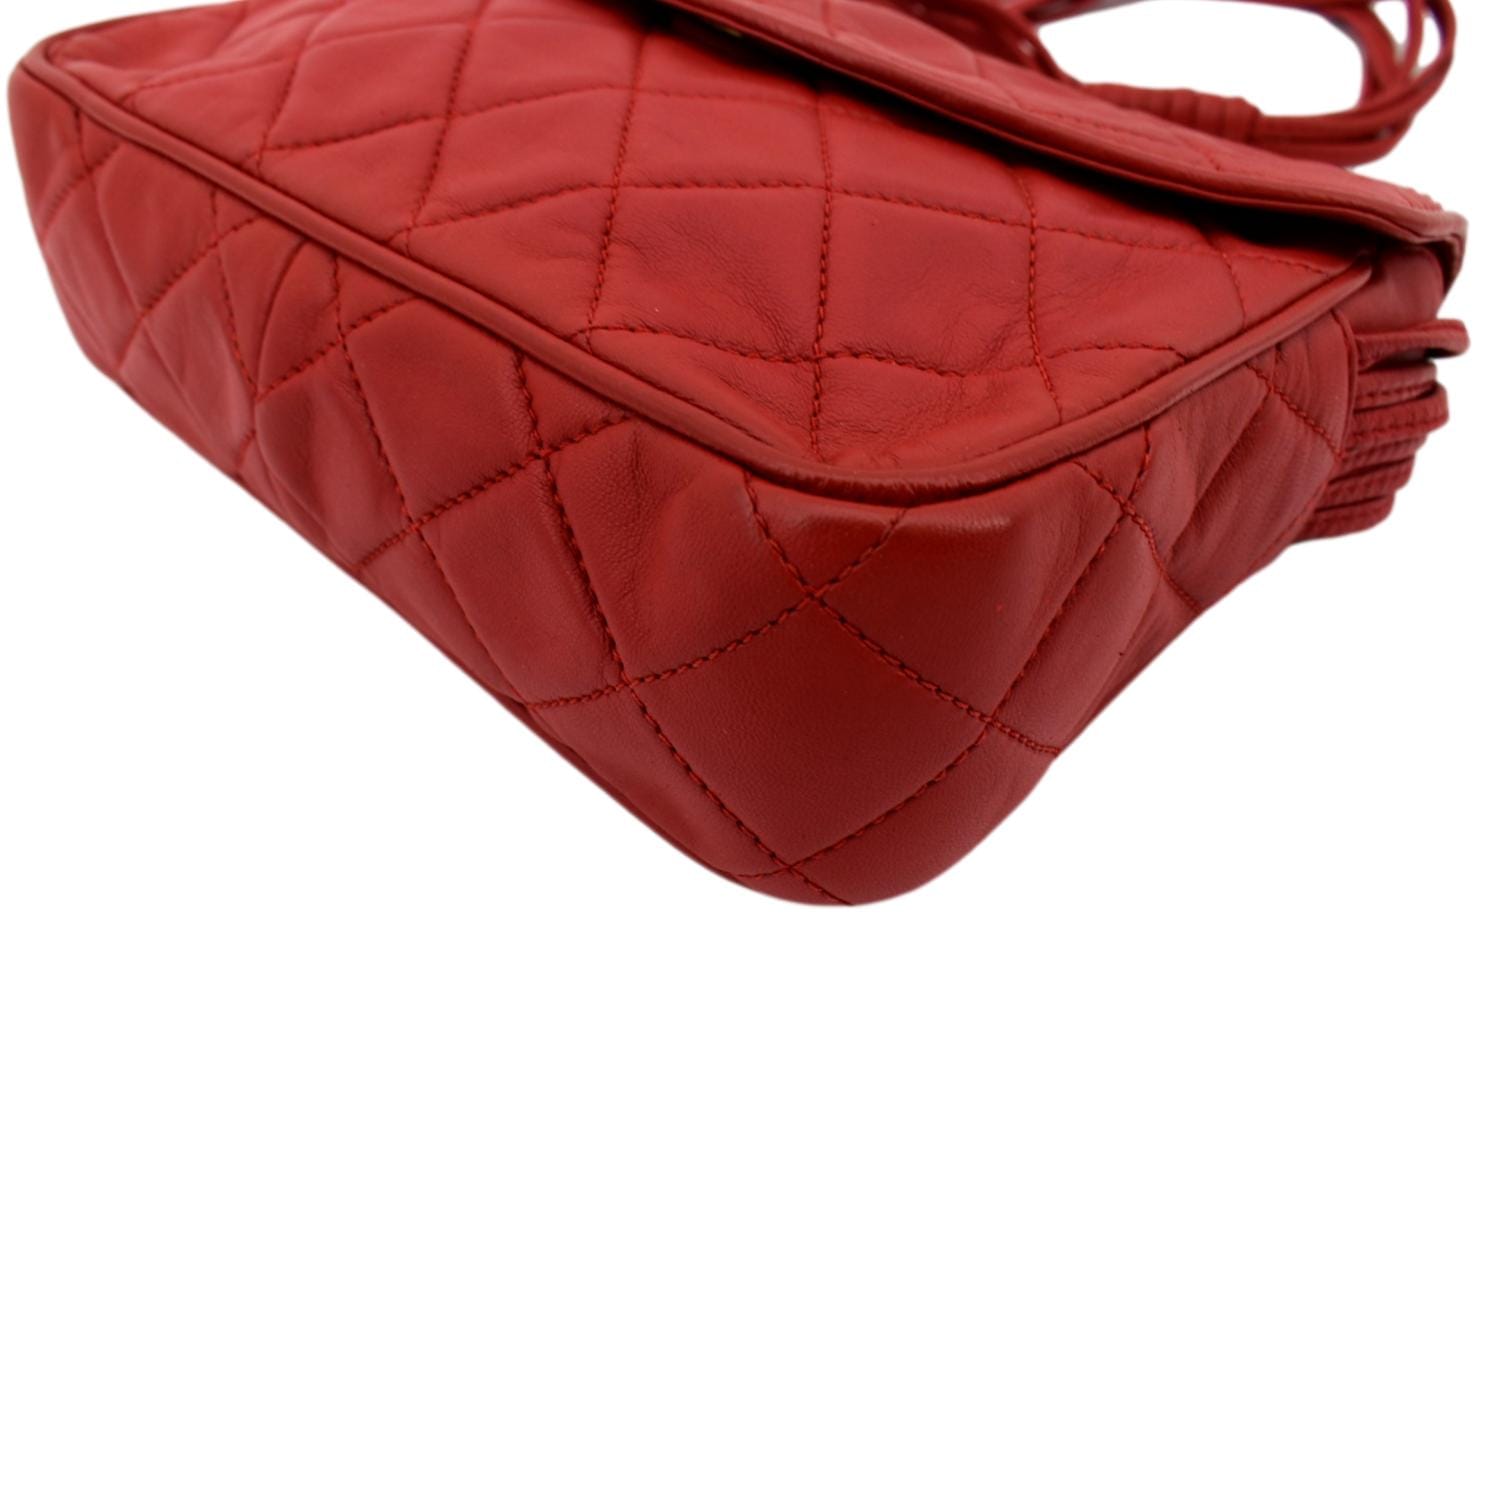 Chanel - Classic Flap Bag - Vintage Red